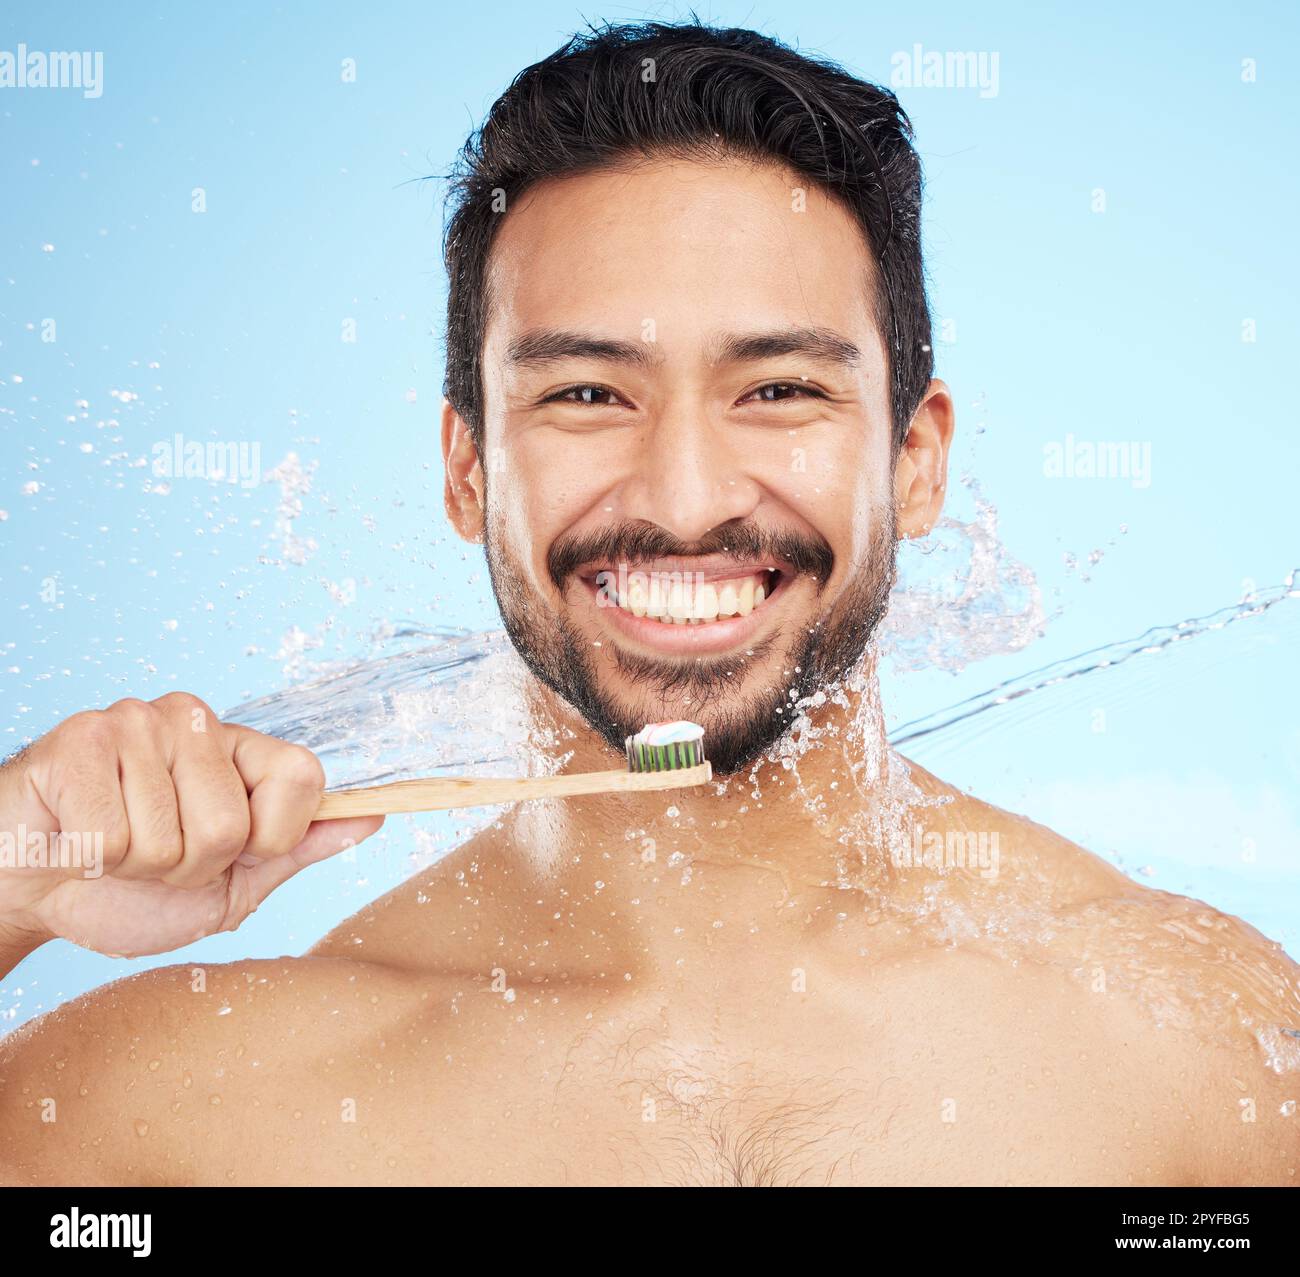 Water splash, portrait or man brushing teeth in studio with toothbrush for white teeth or oral healthcare. Face, tooth paste or happy person cleaning or washing mouth with a healthy dental smile Stock Photo